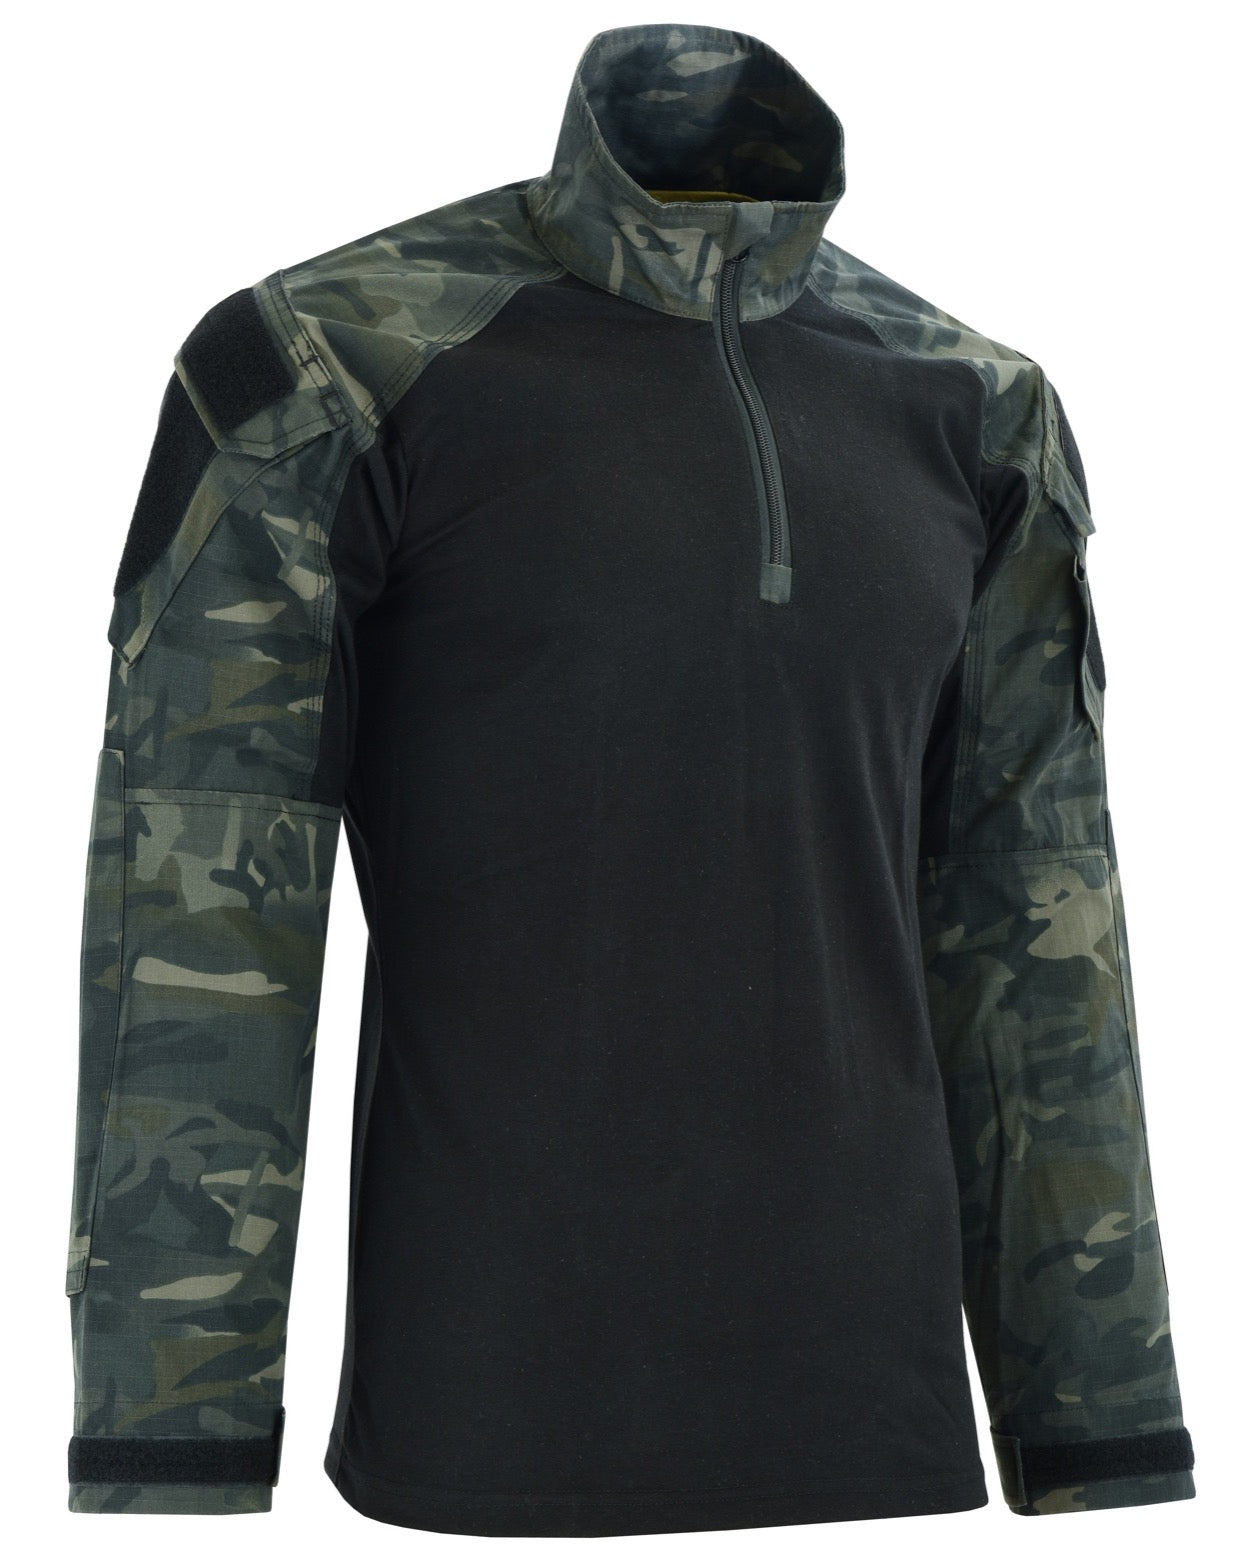 Tactical Zone HYBRID TACTICAL SHIRT IS A PERFECT COMBAT SHIRT Colour  UTP-DarkNight Side